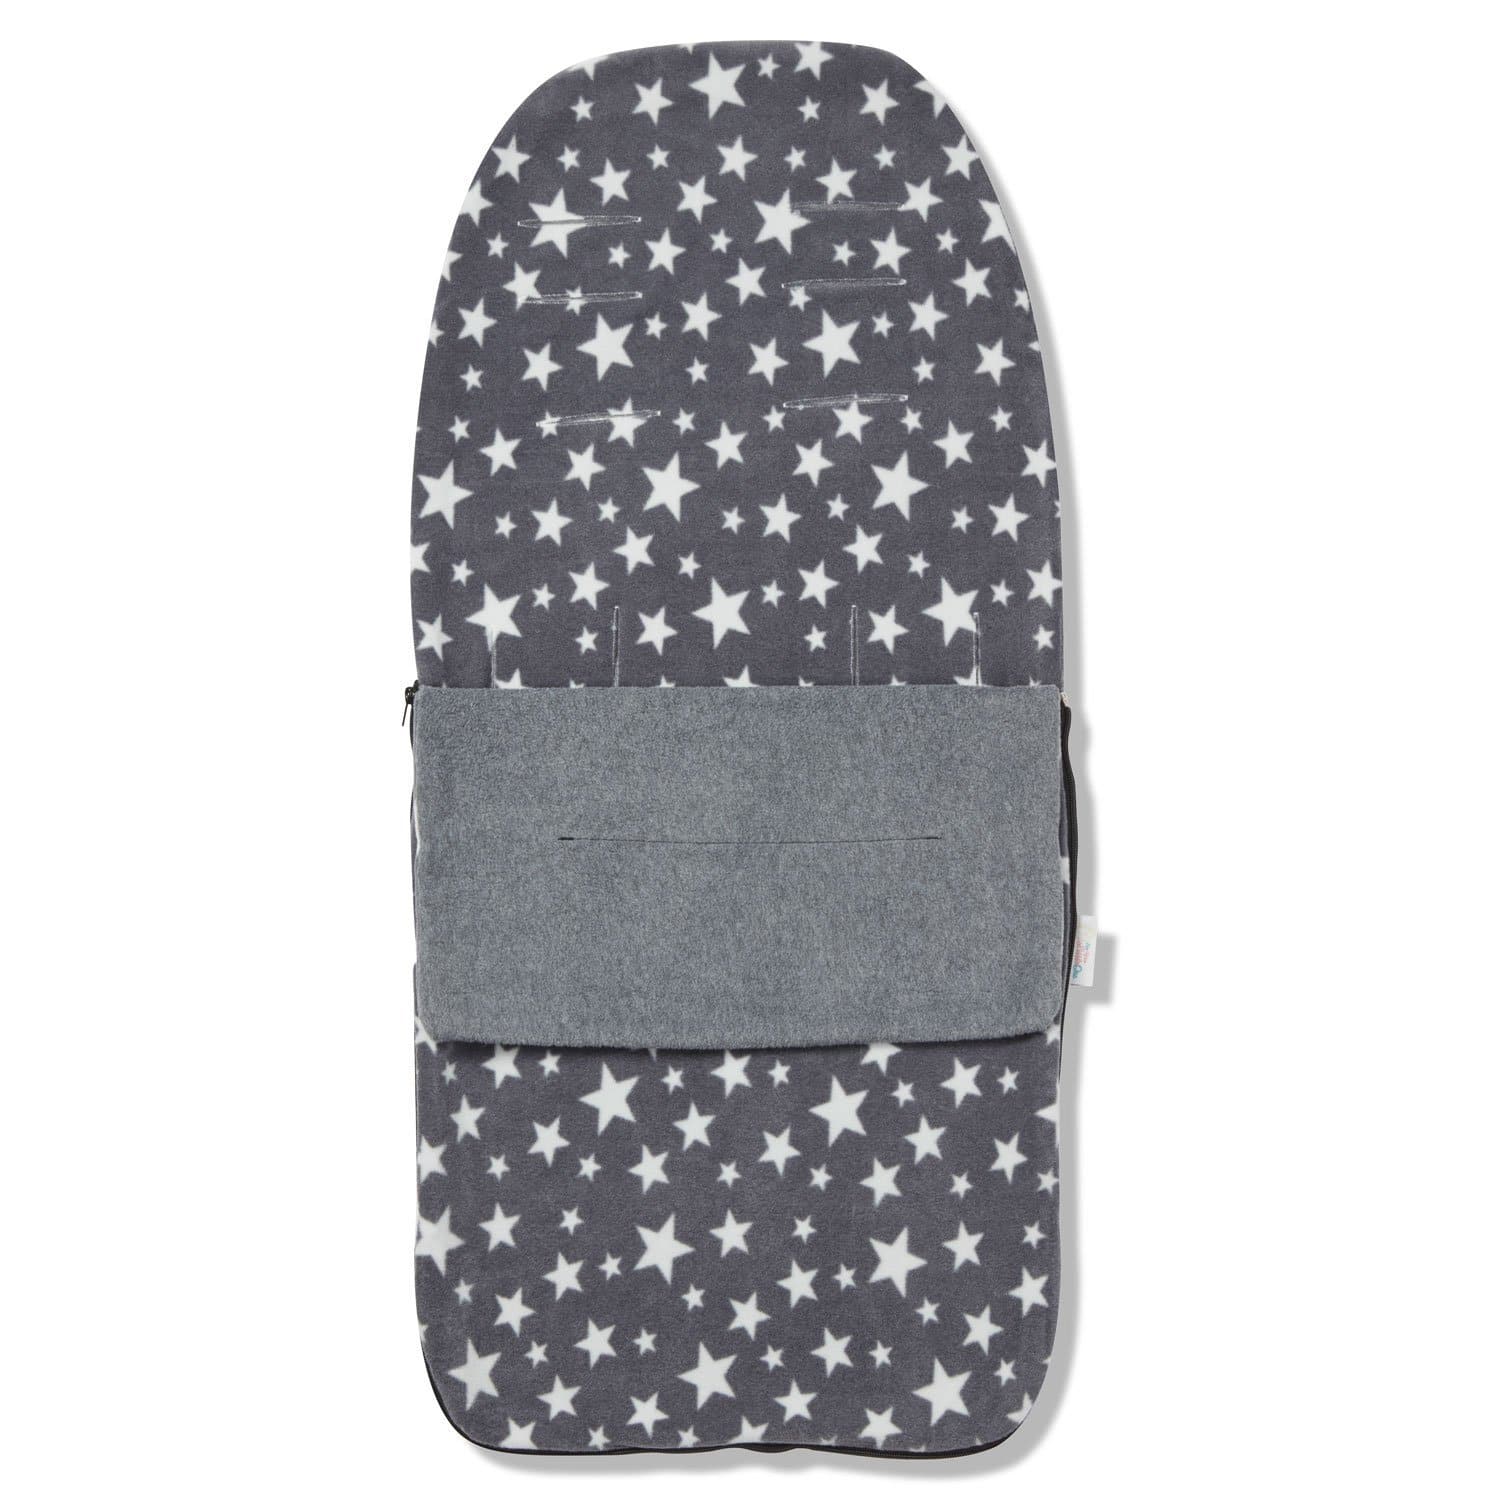 Snuggle Summer Footmuff Compatible with Stokke - For Your Little One